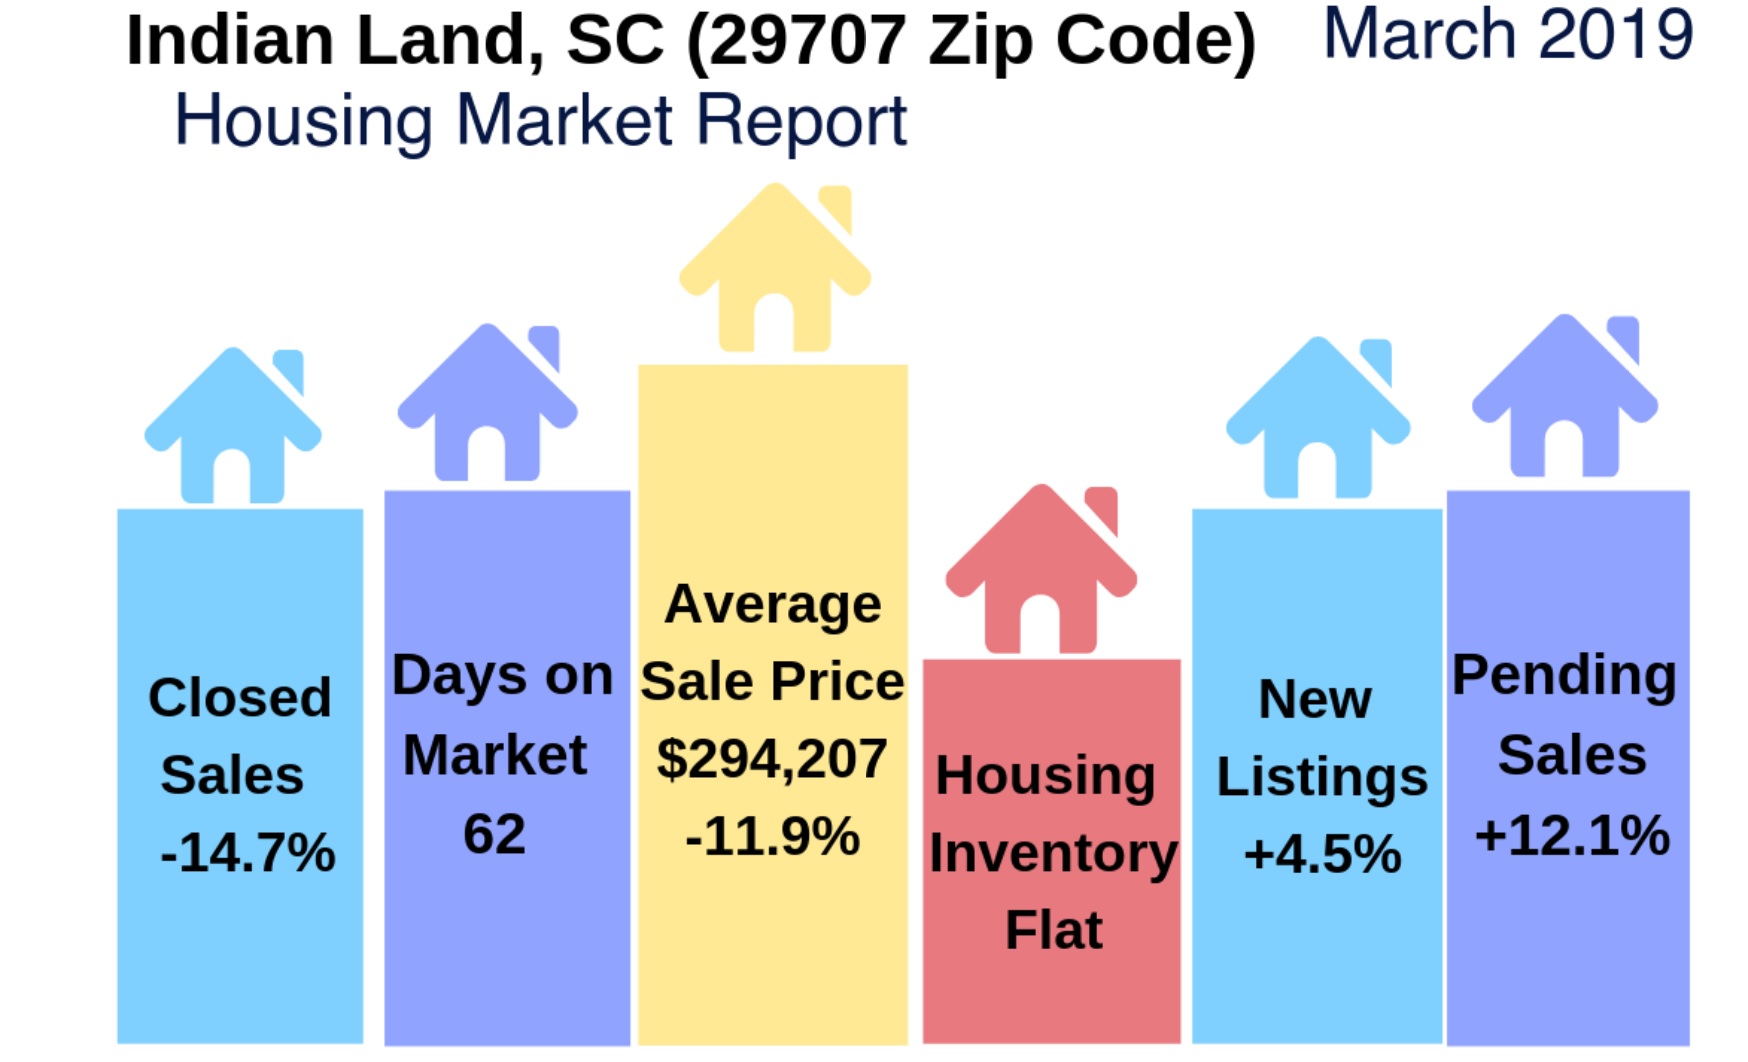 Indian Land Housing Update/Video: March 2019